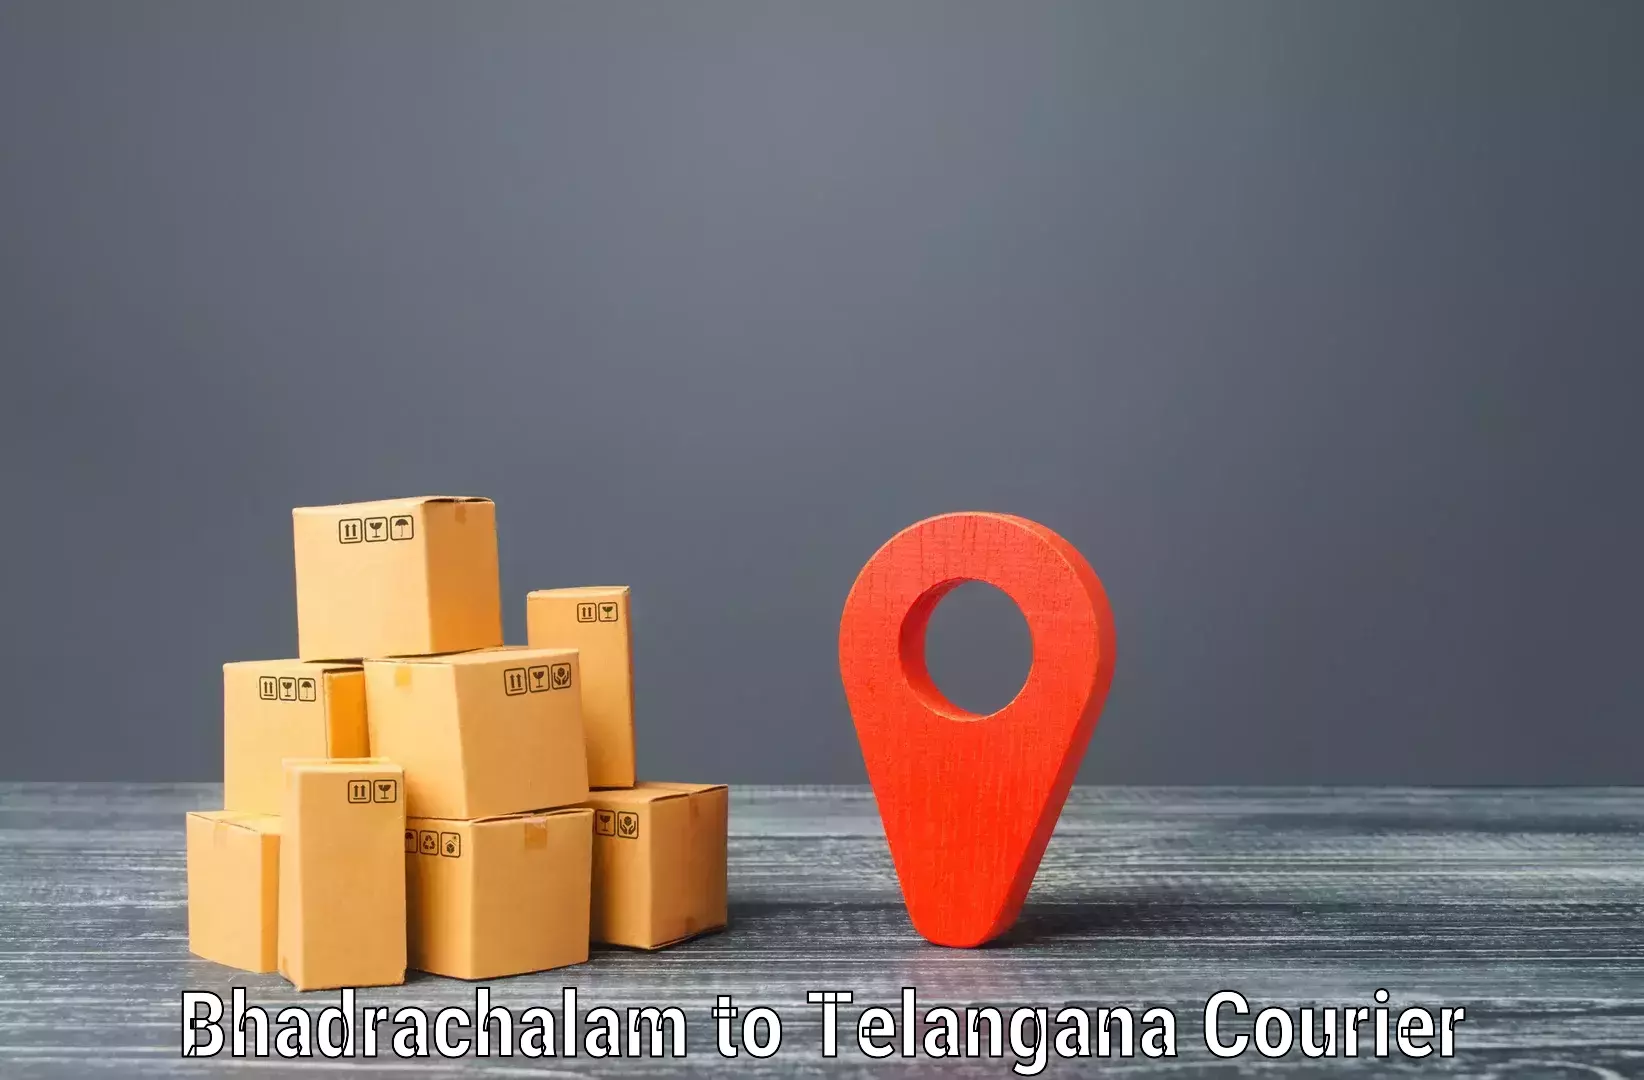 24/7 courier service in Bhadrachalam to Mominpet